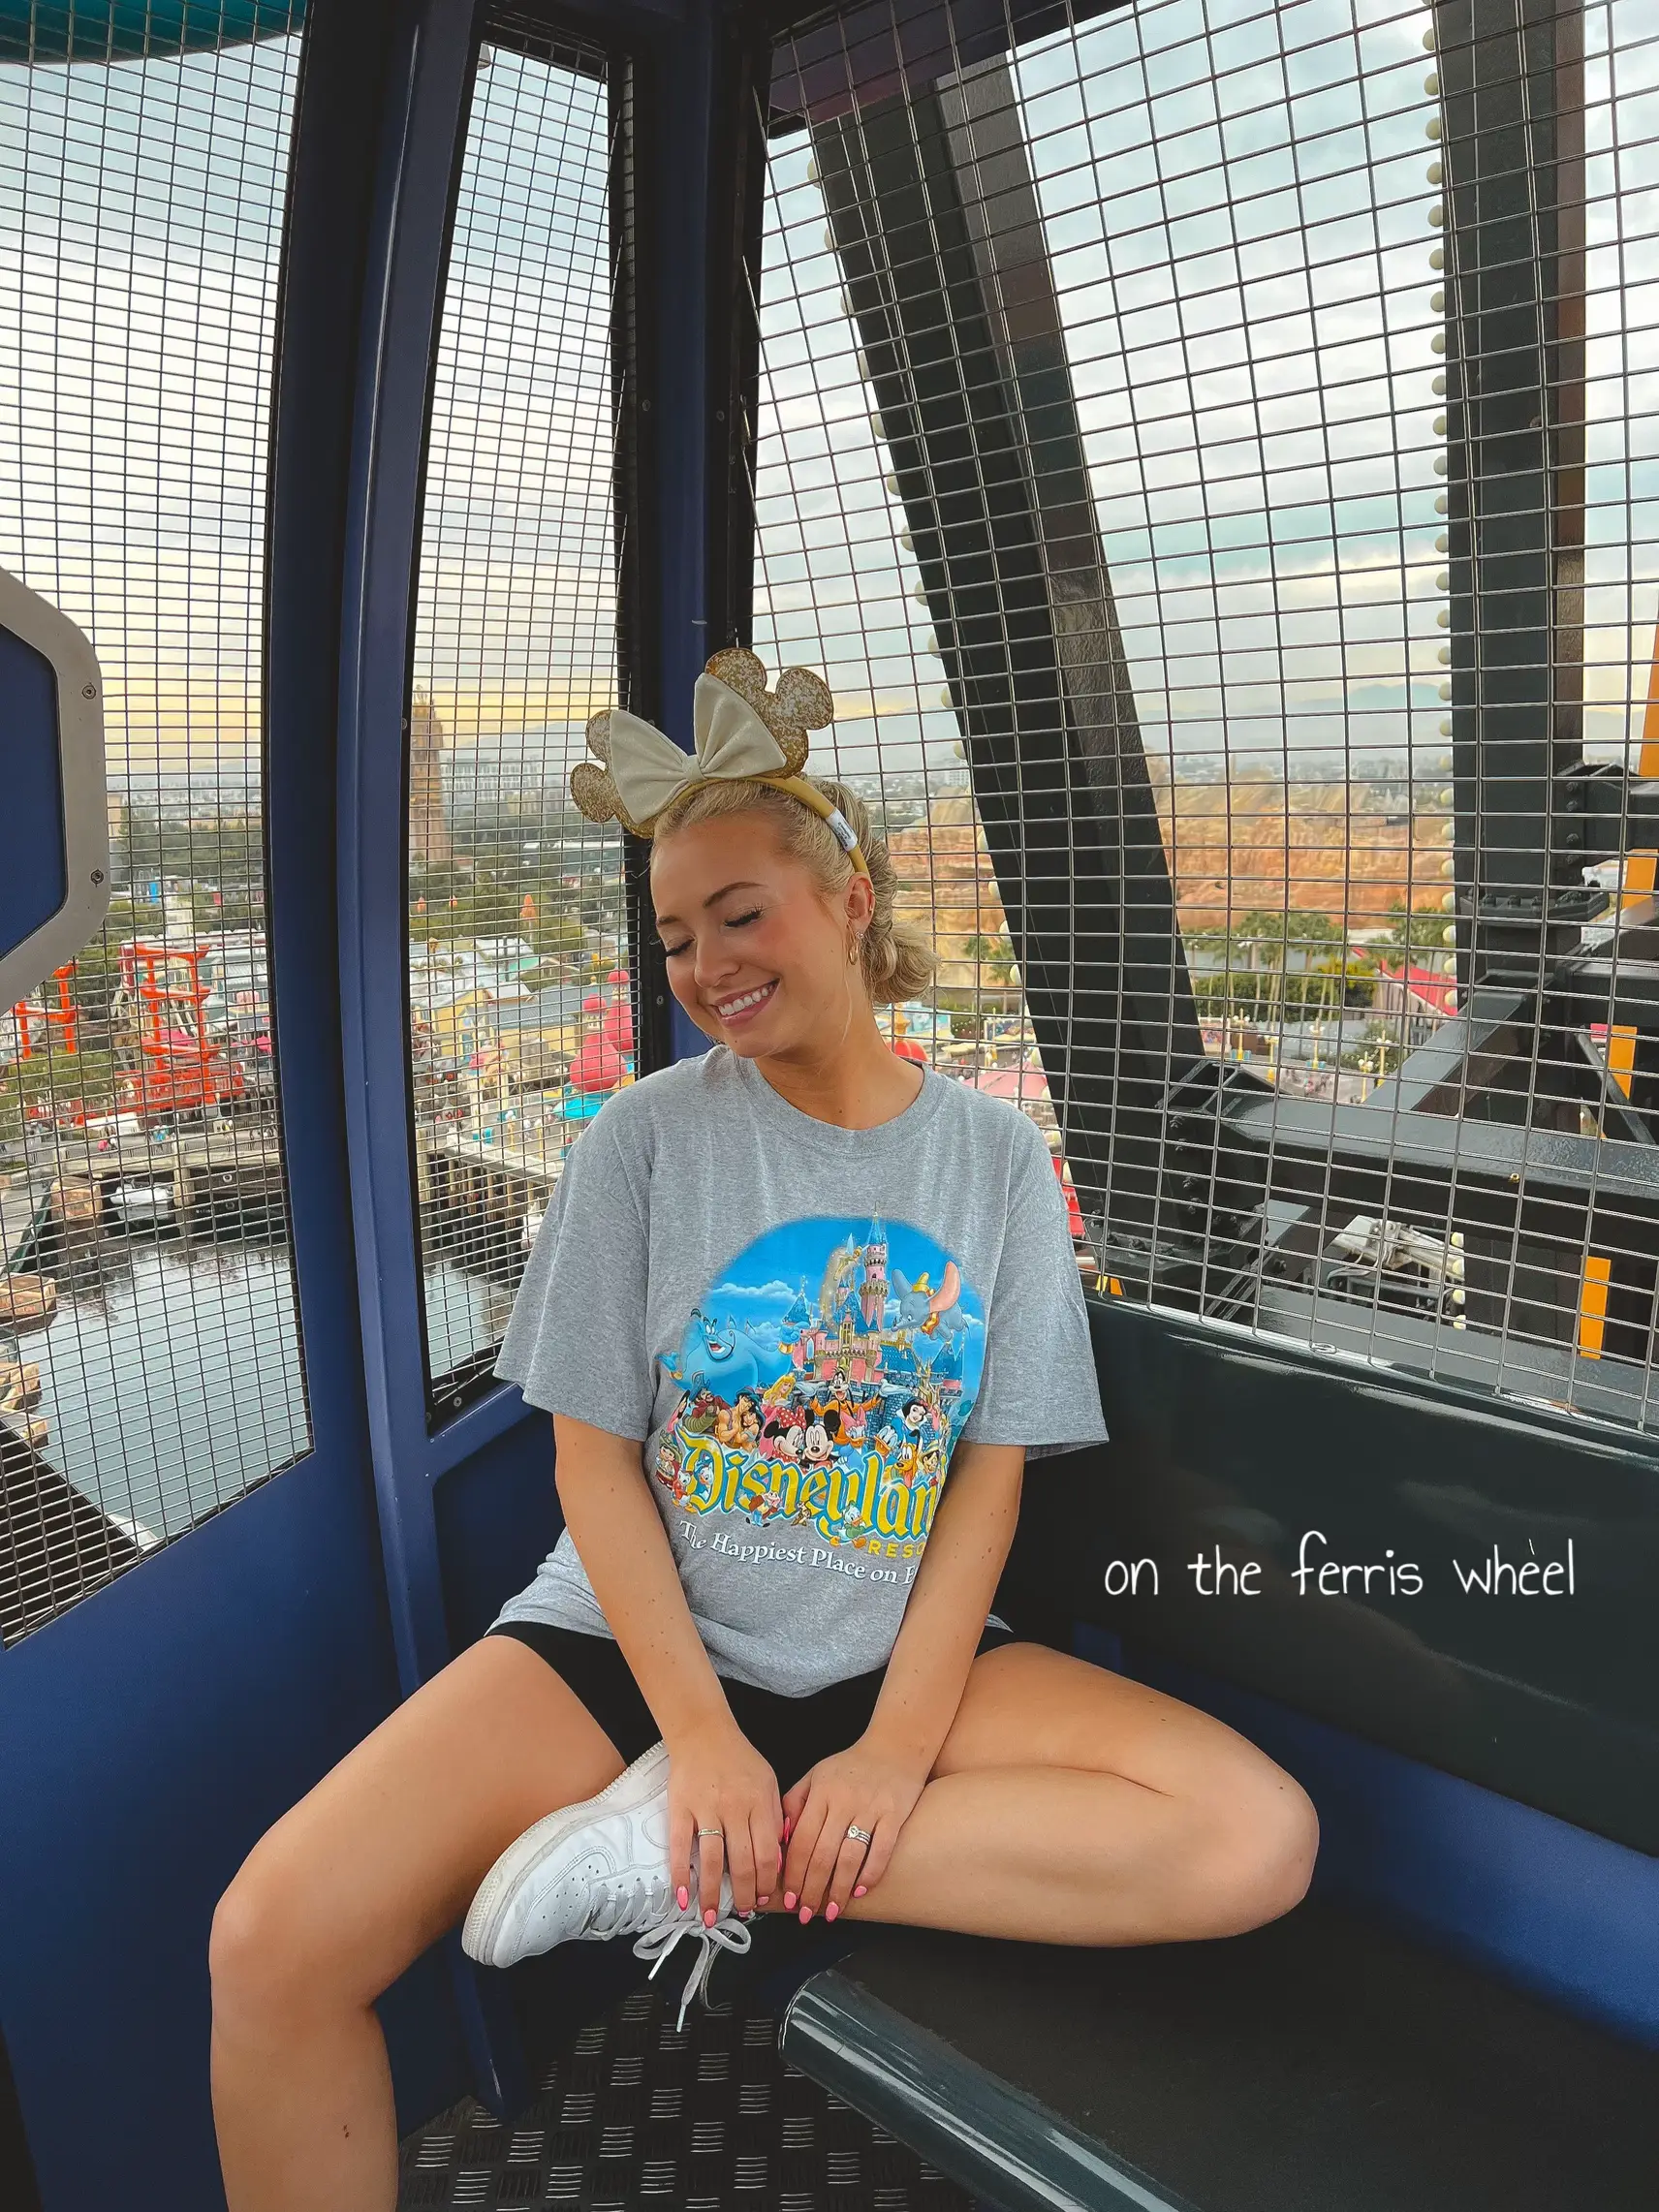  A woman wearing a white shirt and black shorts is sitting on a ferris wheel.